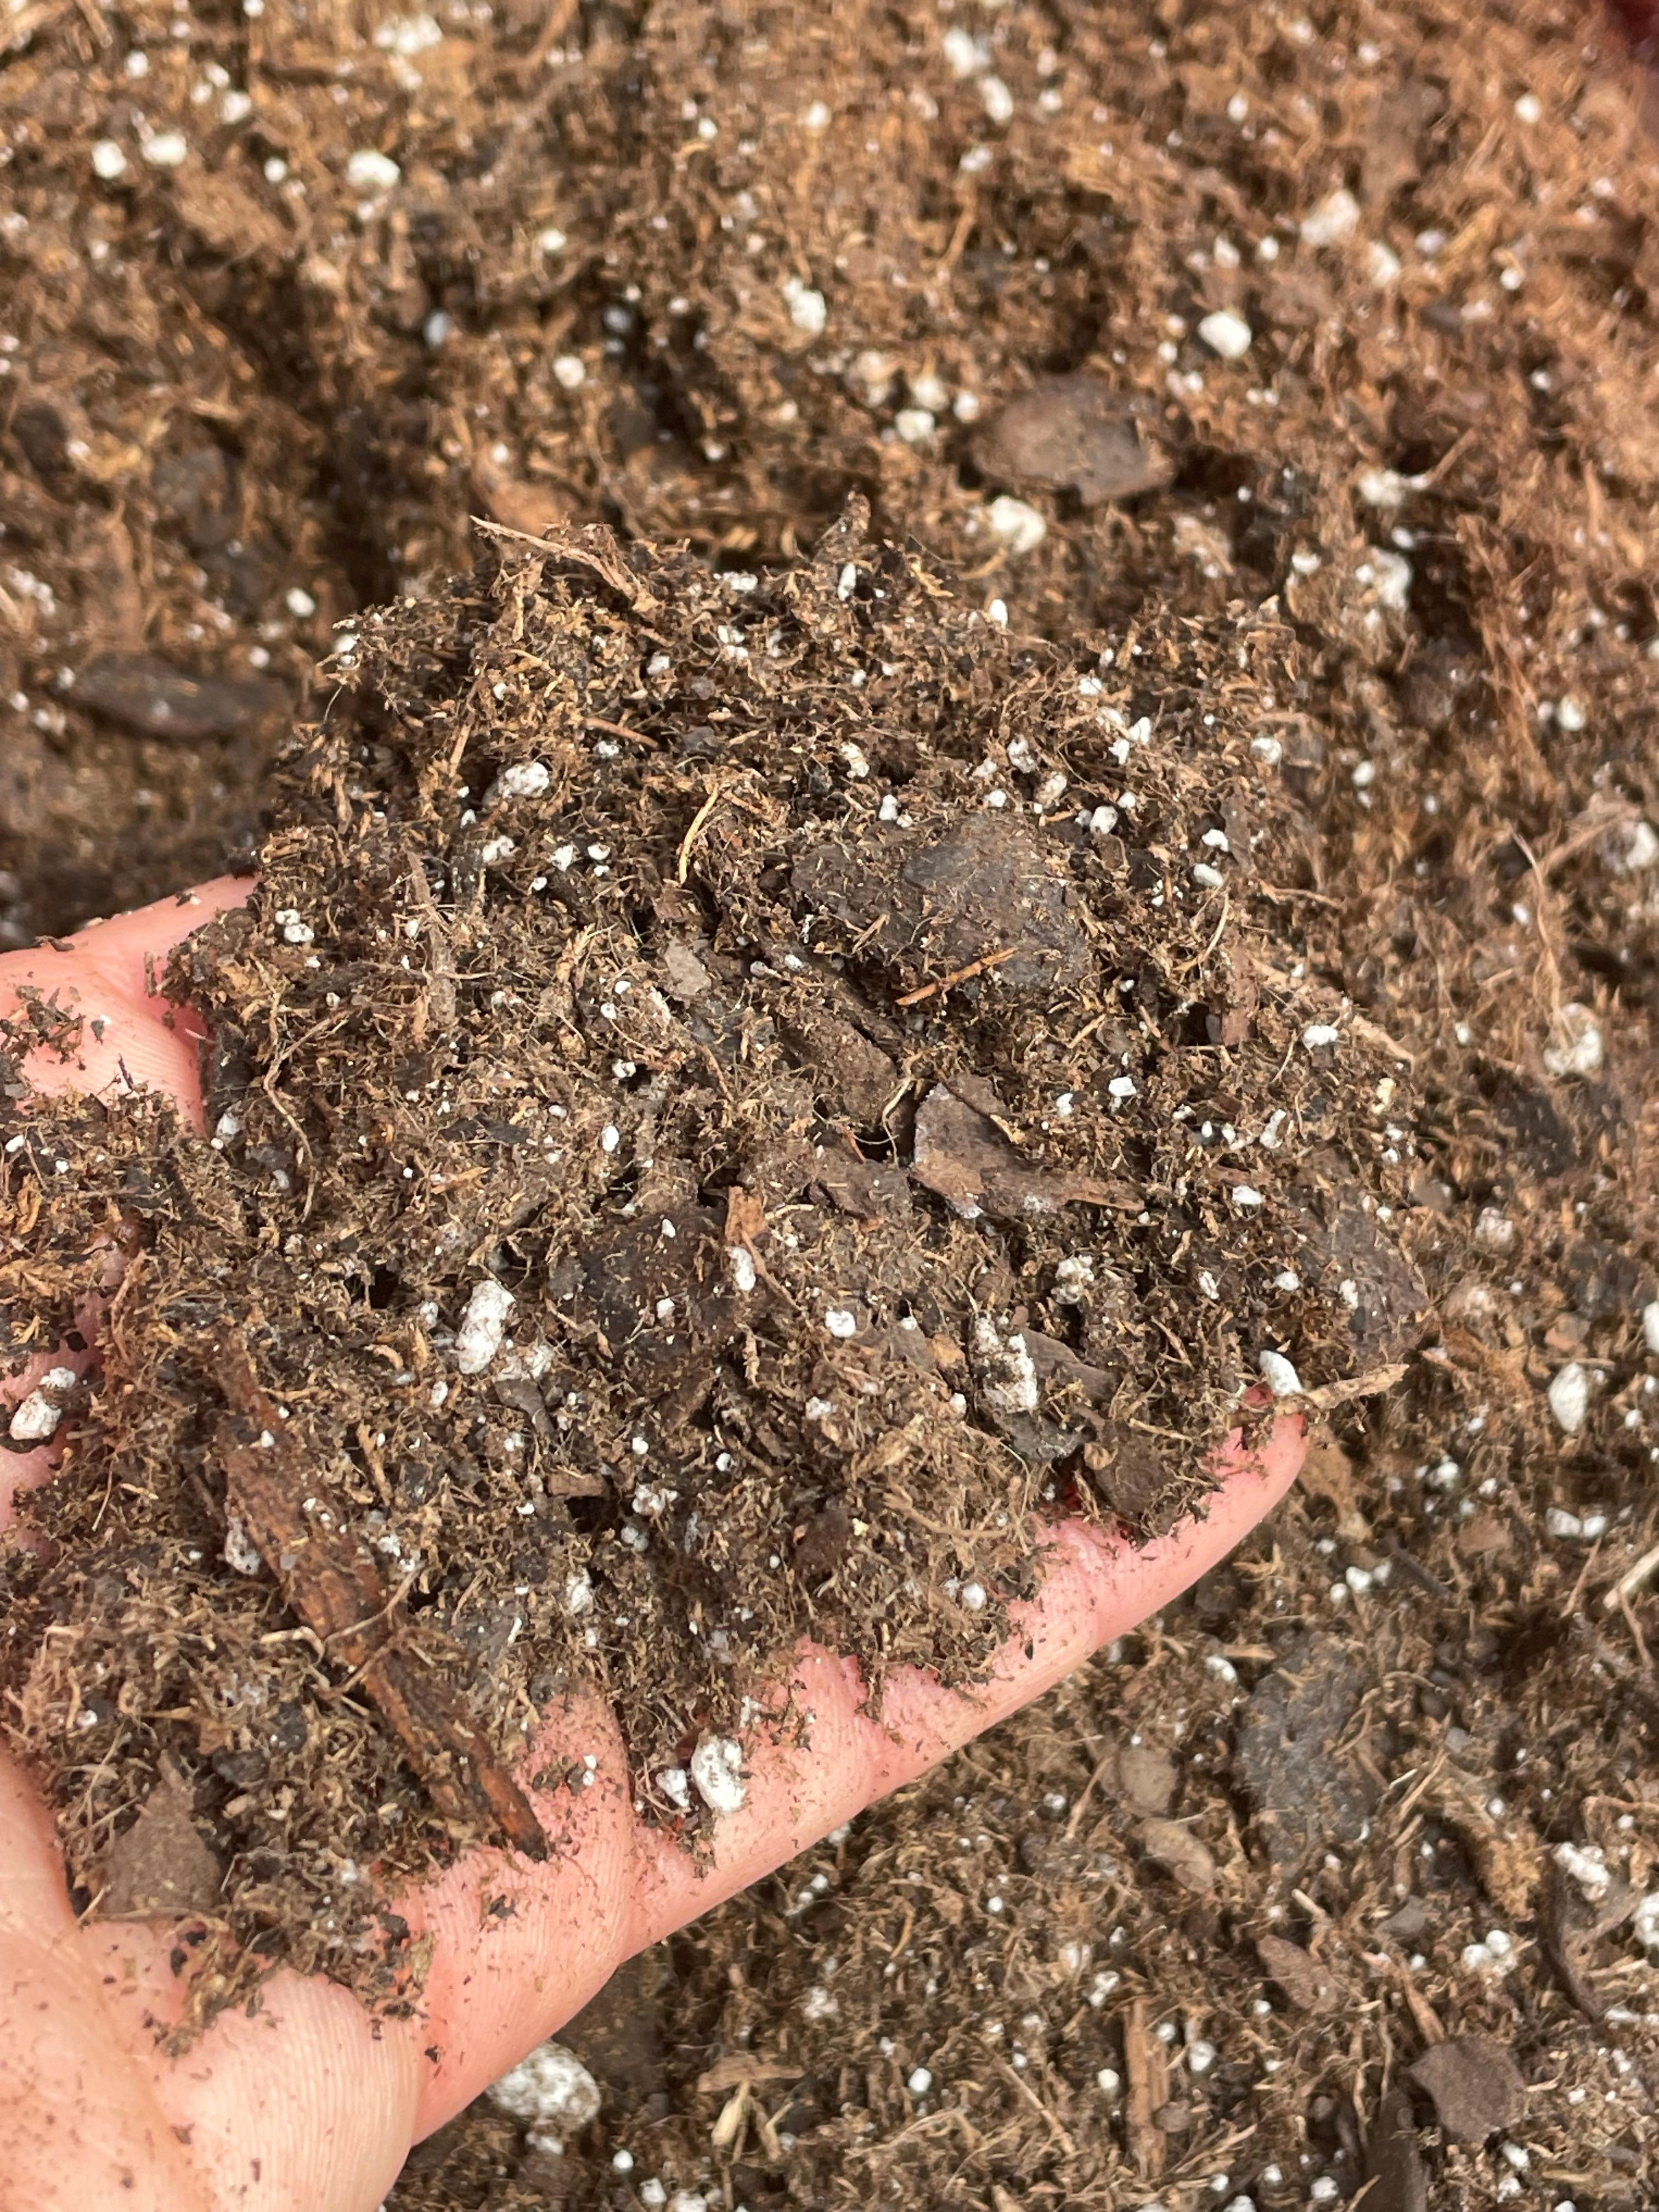 All Potting Soils Are Not Created Equal: Part 1 in the Soil Series